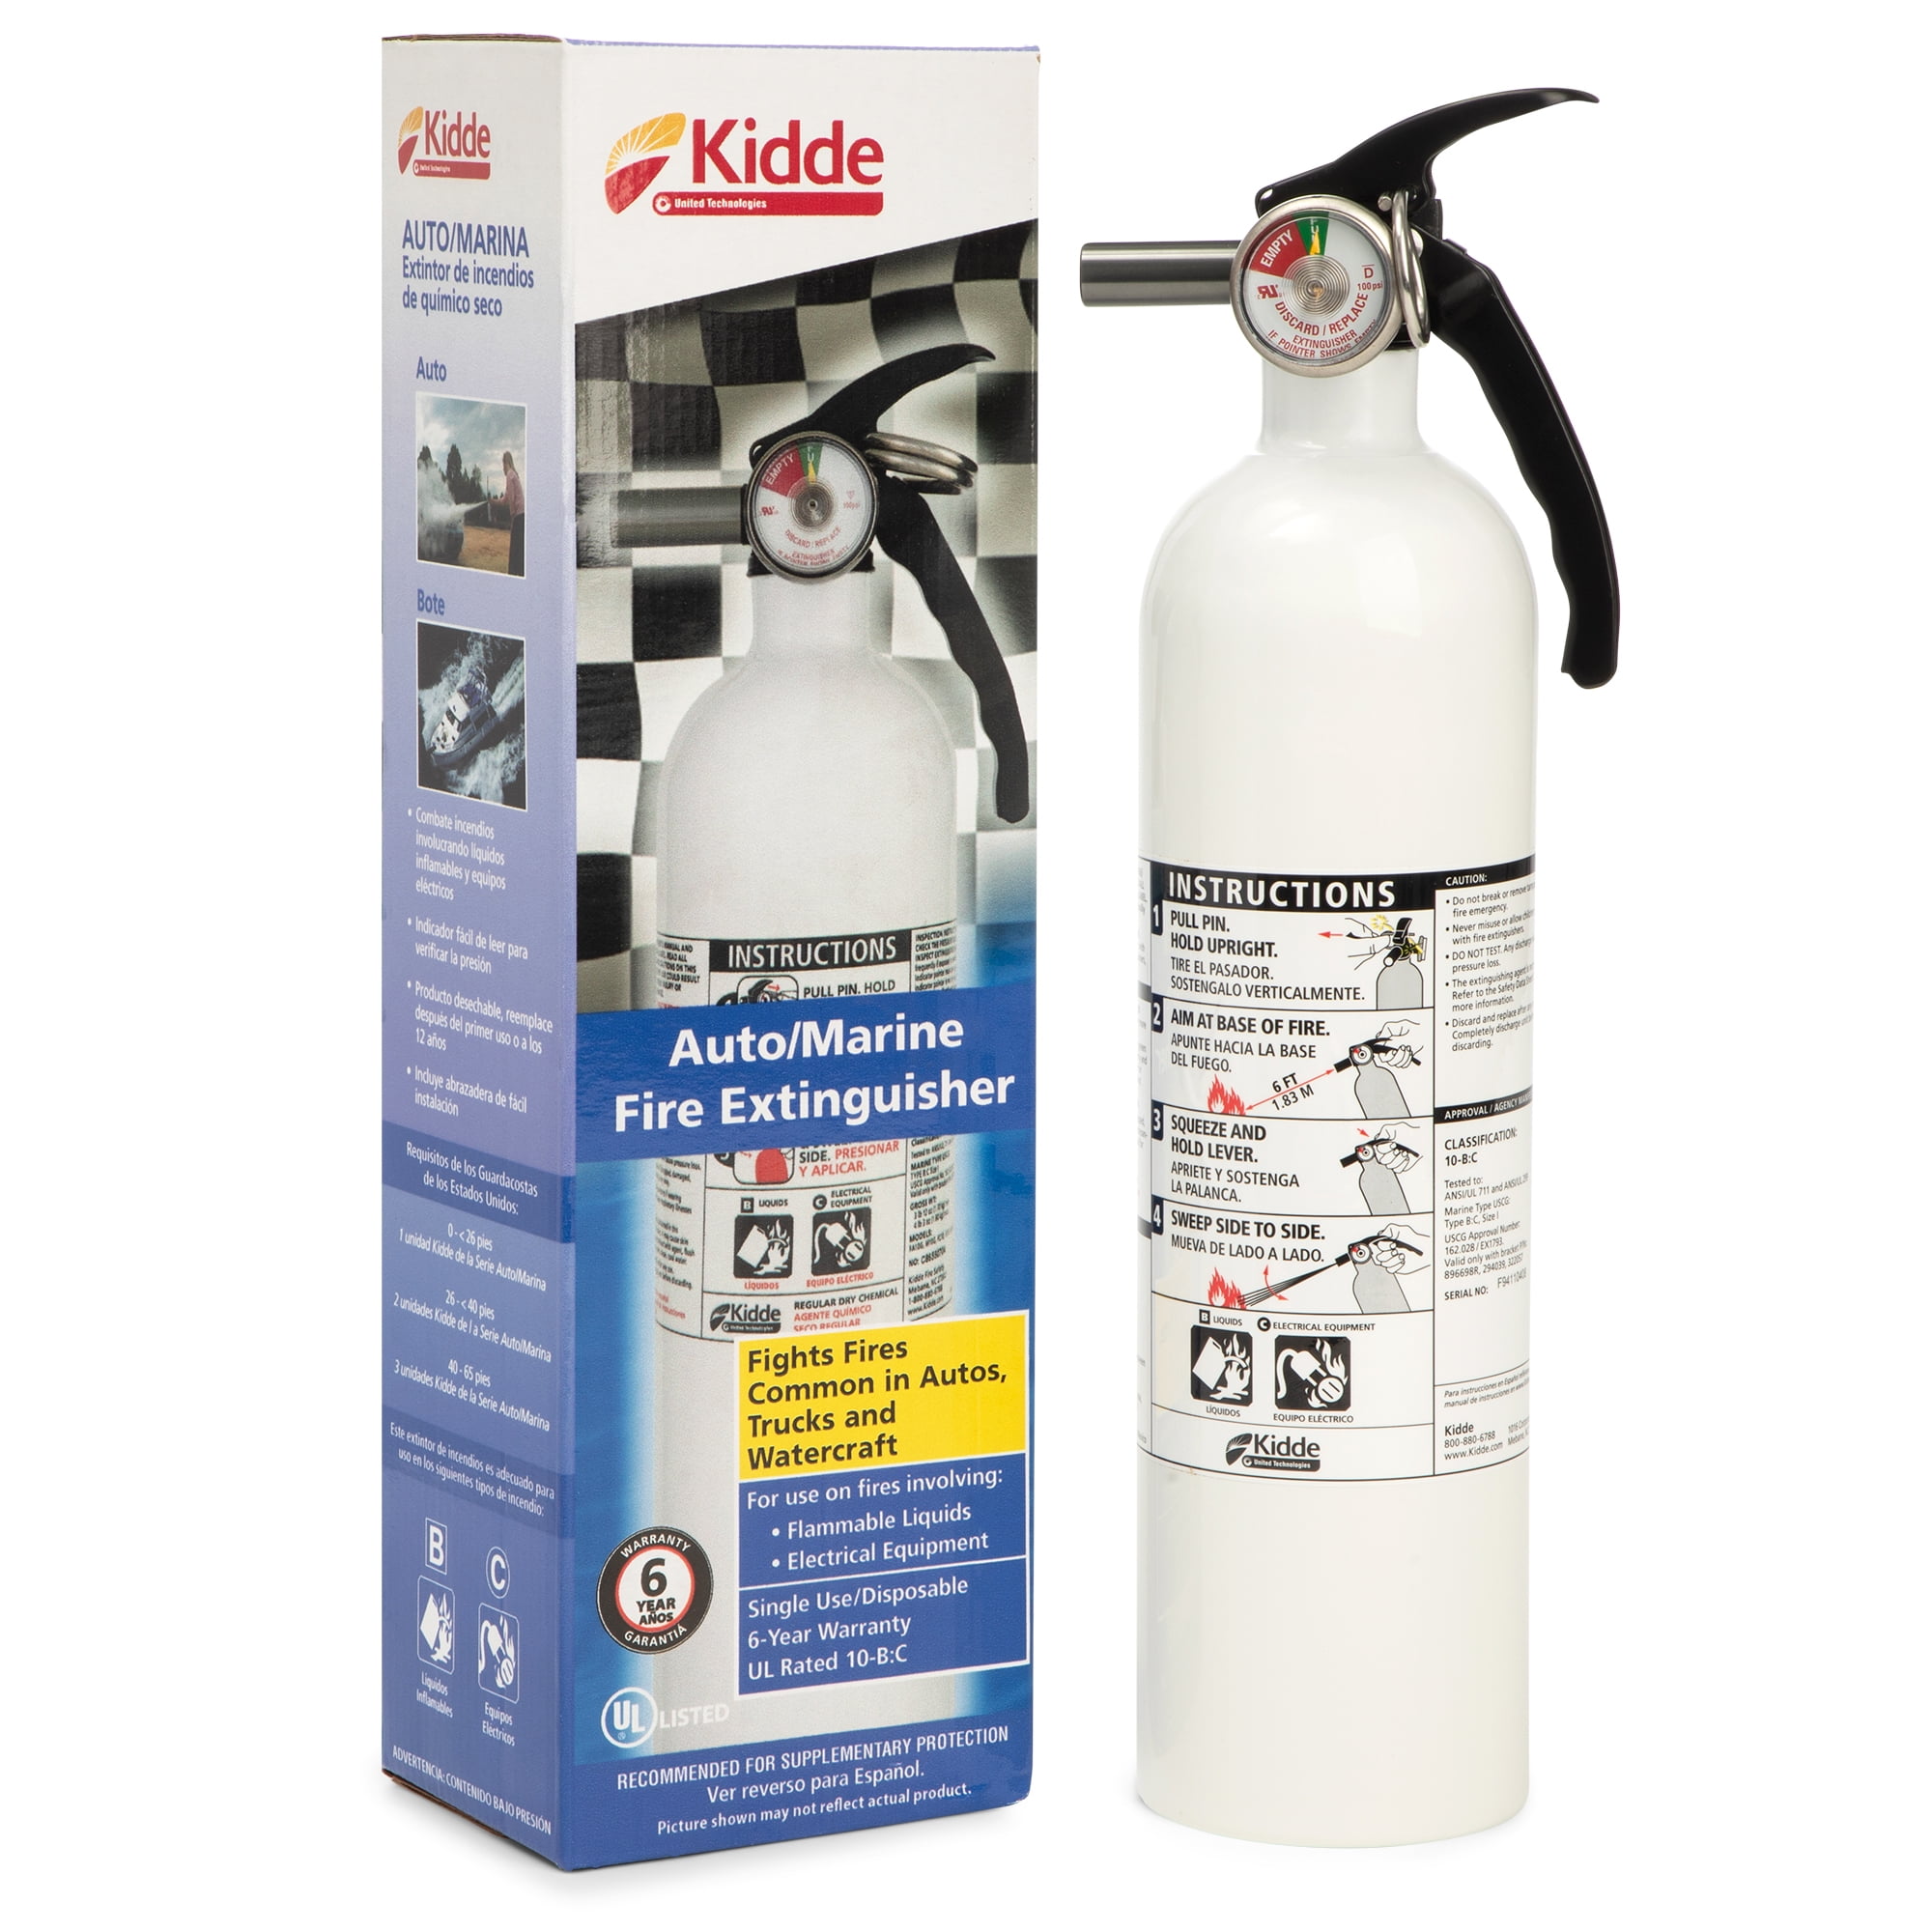 Kidde Dry Chemical Fire Extinguisher Home Car Auto Garage Kitchen 5bc Empty for sale online 